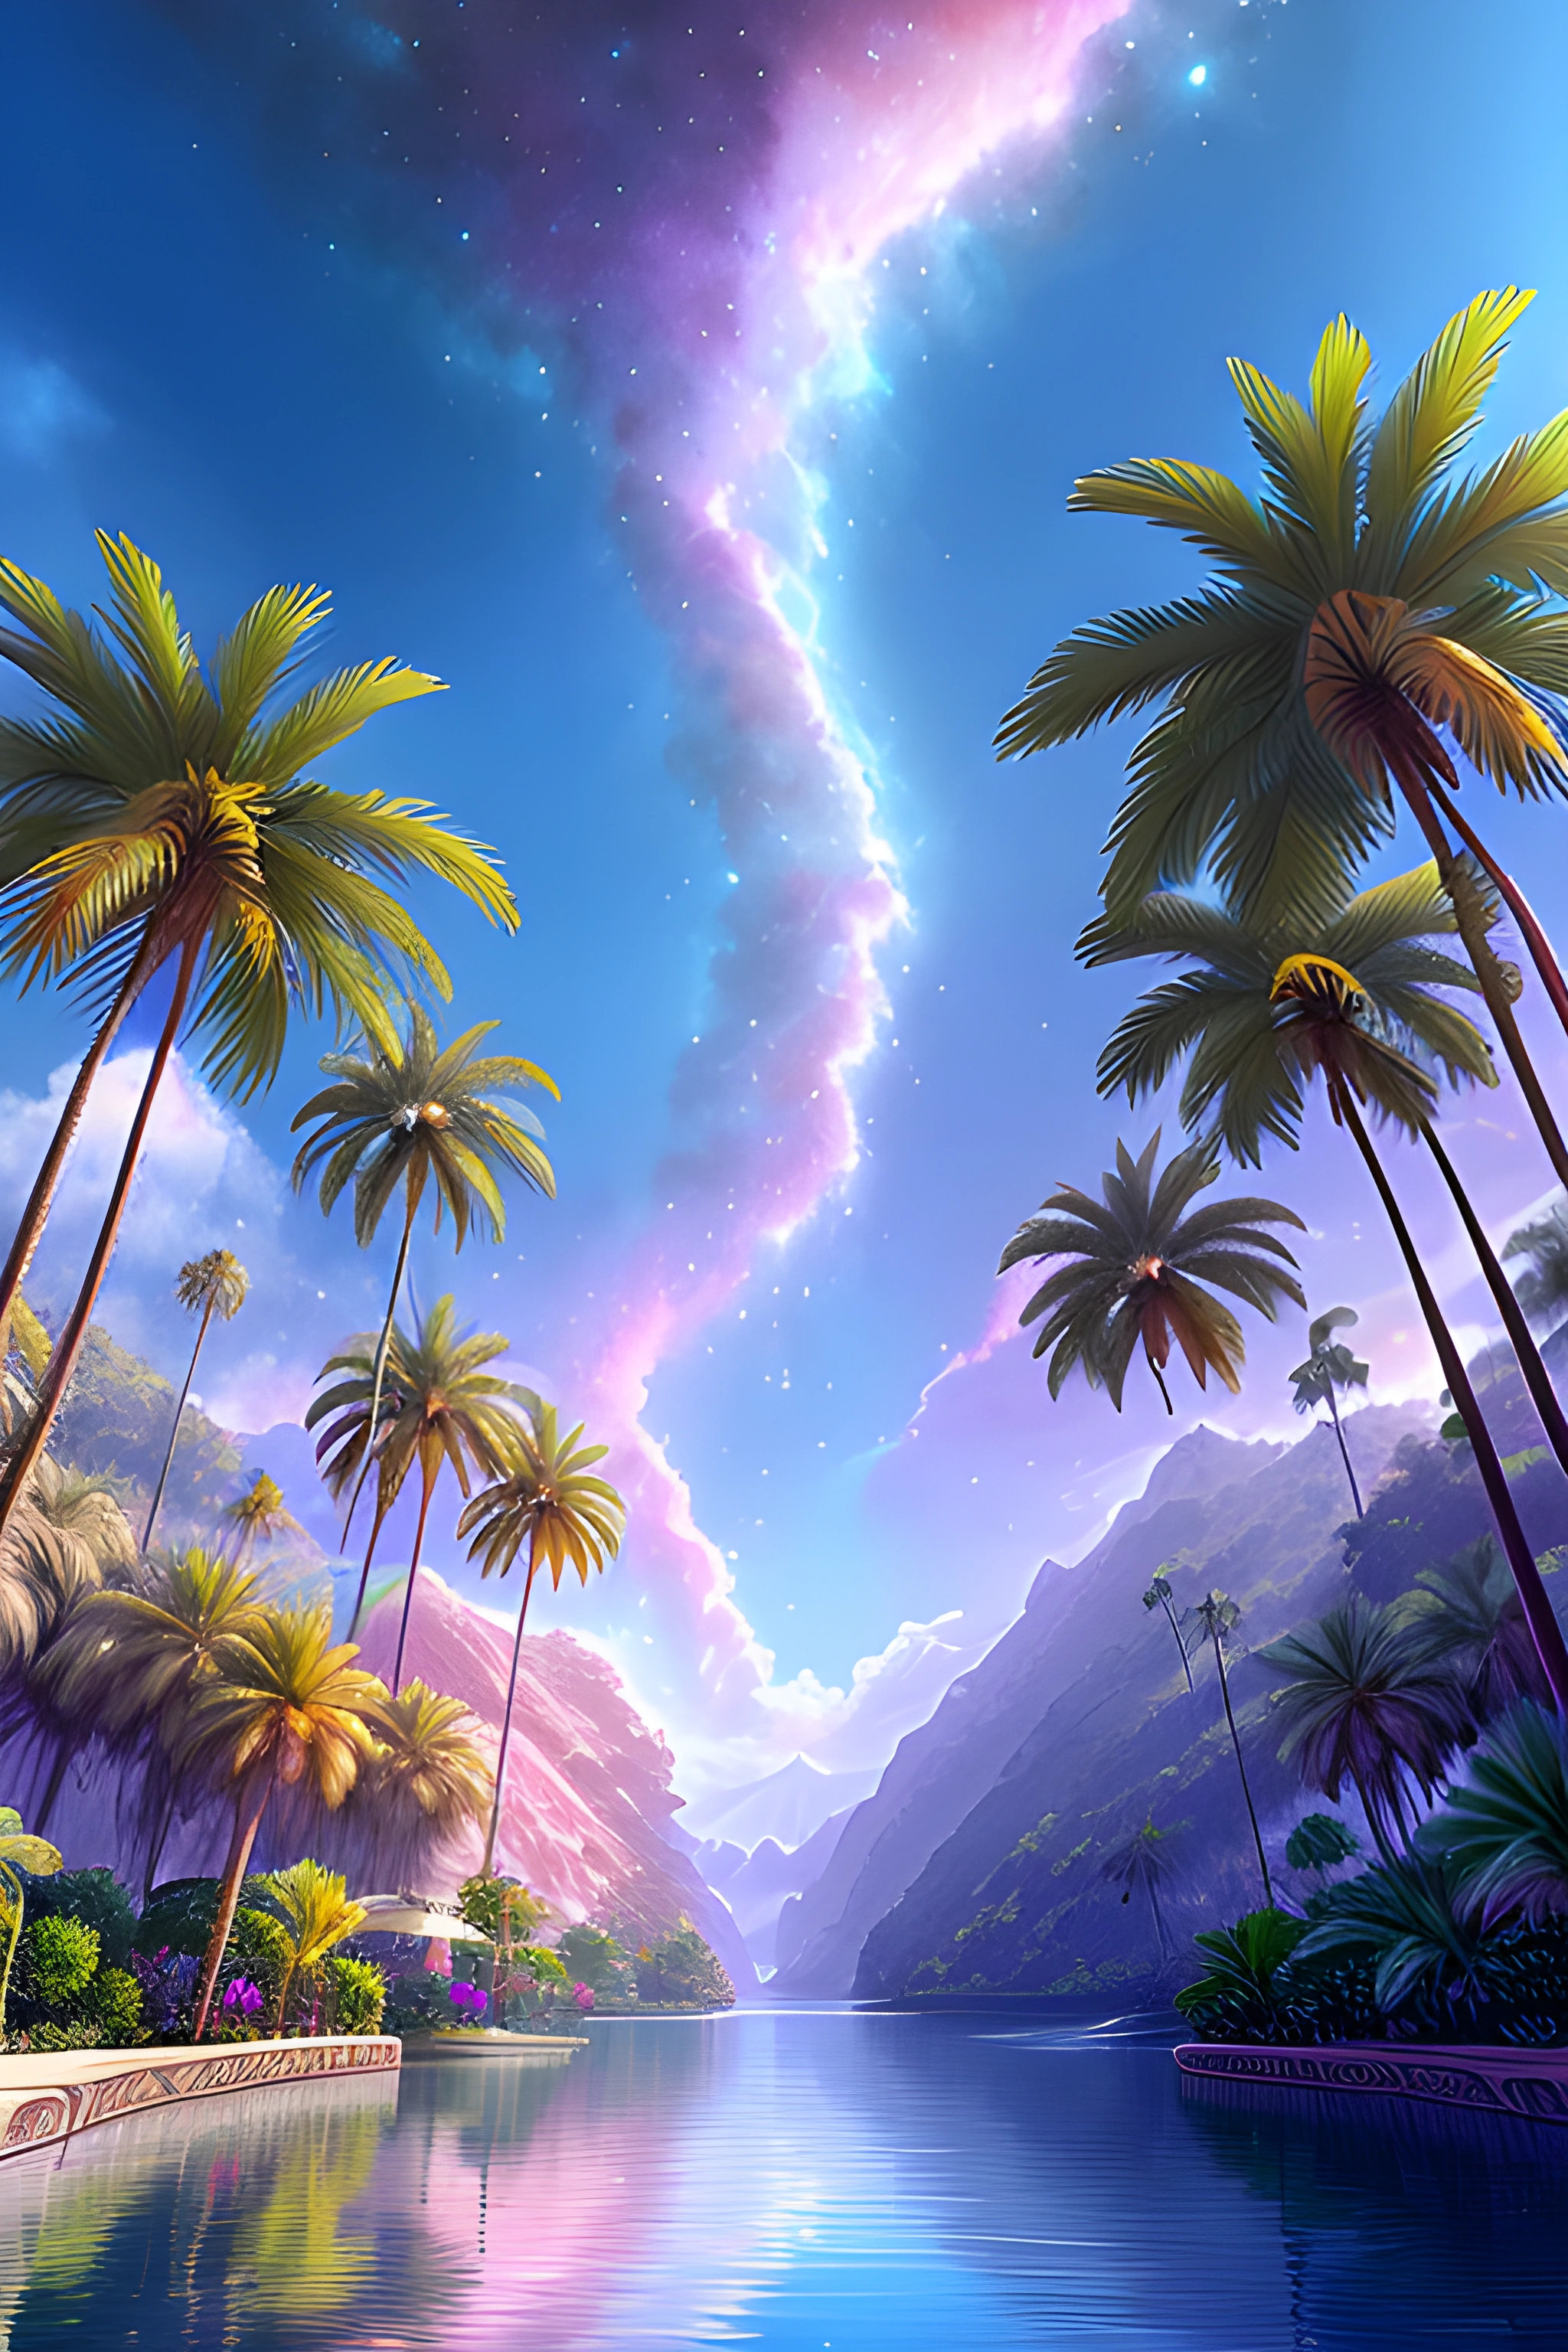 a painting of a tropical island with palm trees